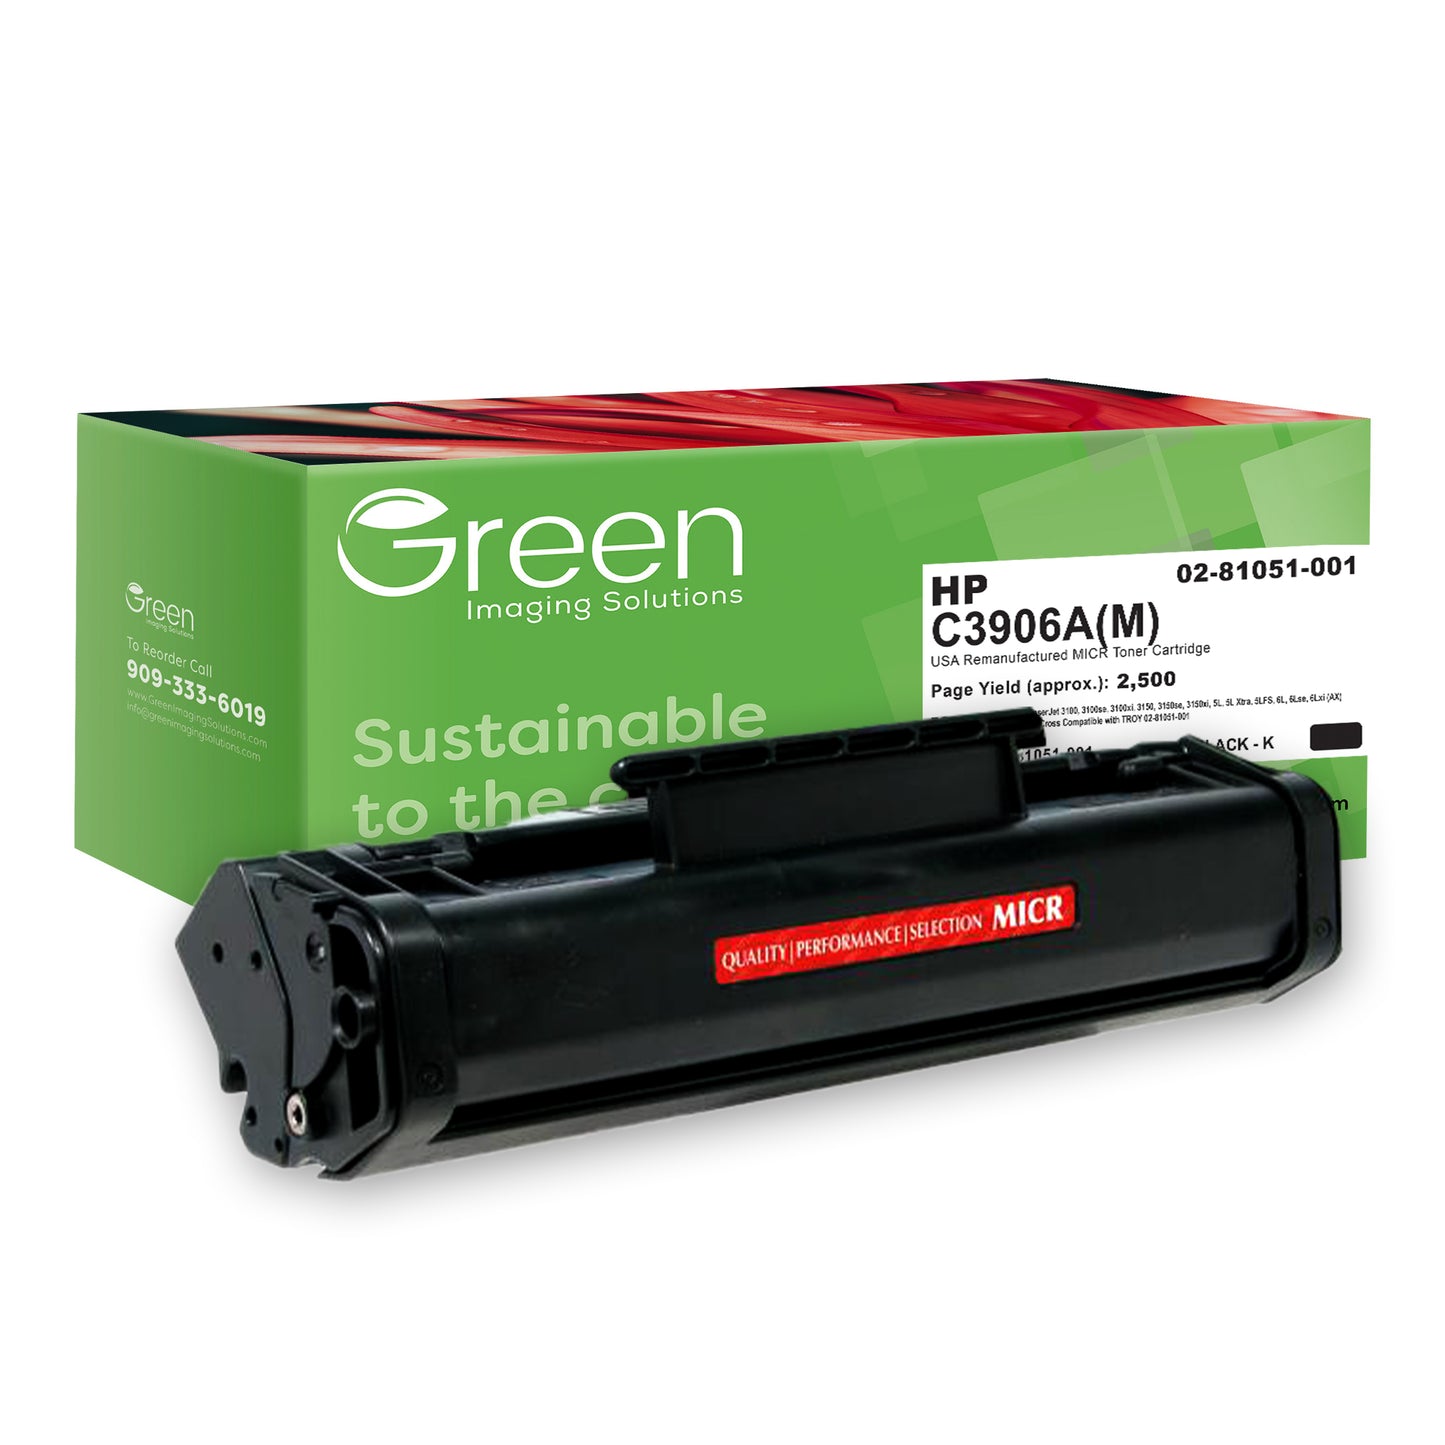 GIS USA Remanufactured MICR Toner Cartridge for HP C3906A, TROY 02-81051-001